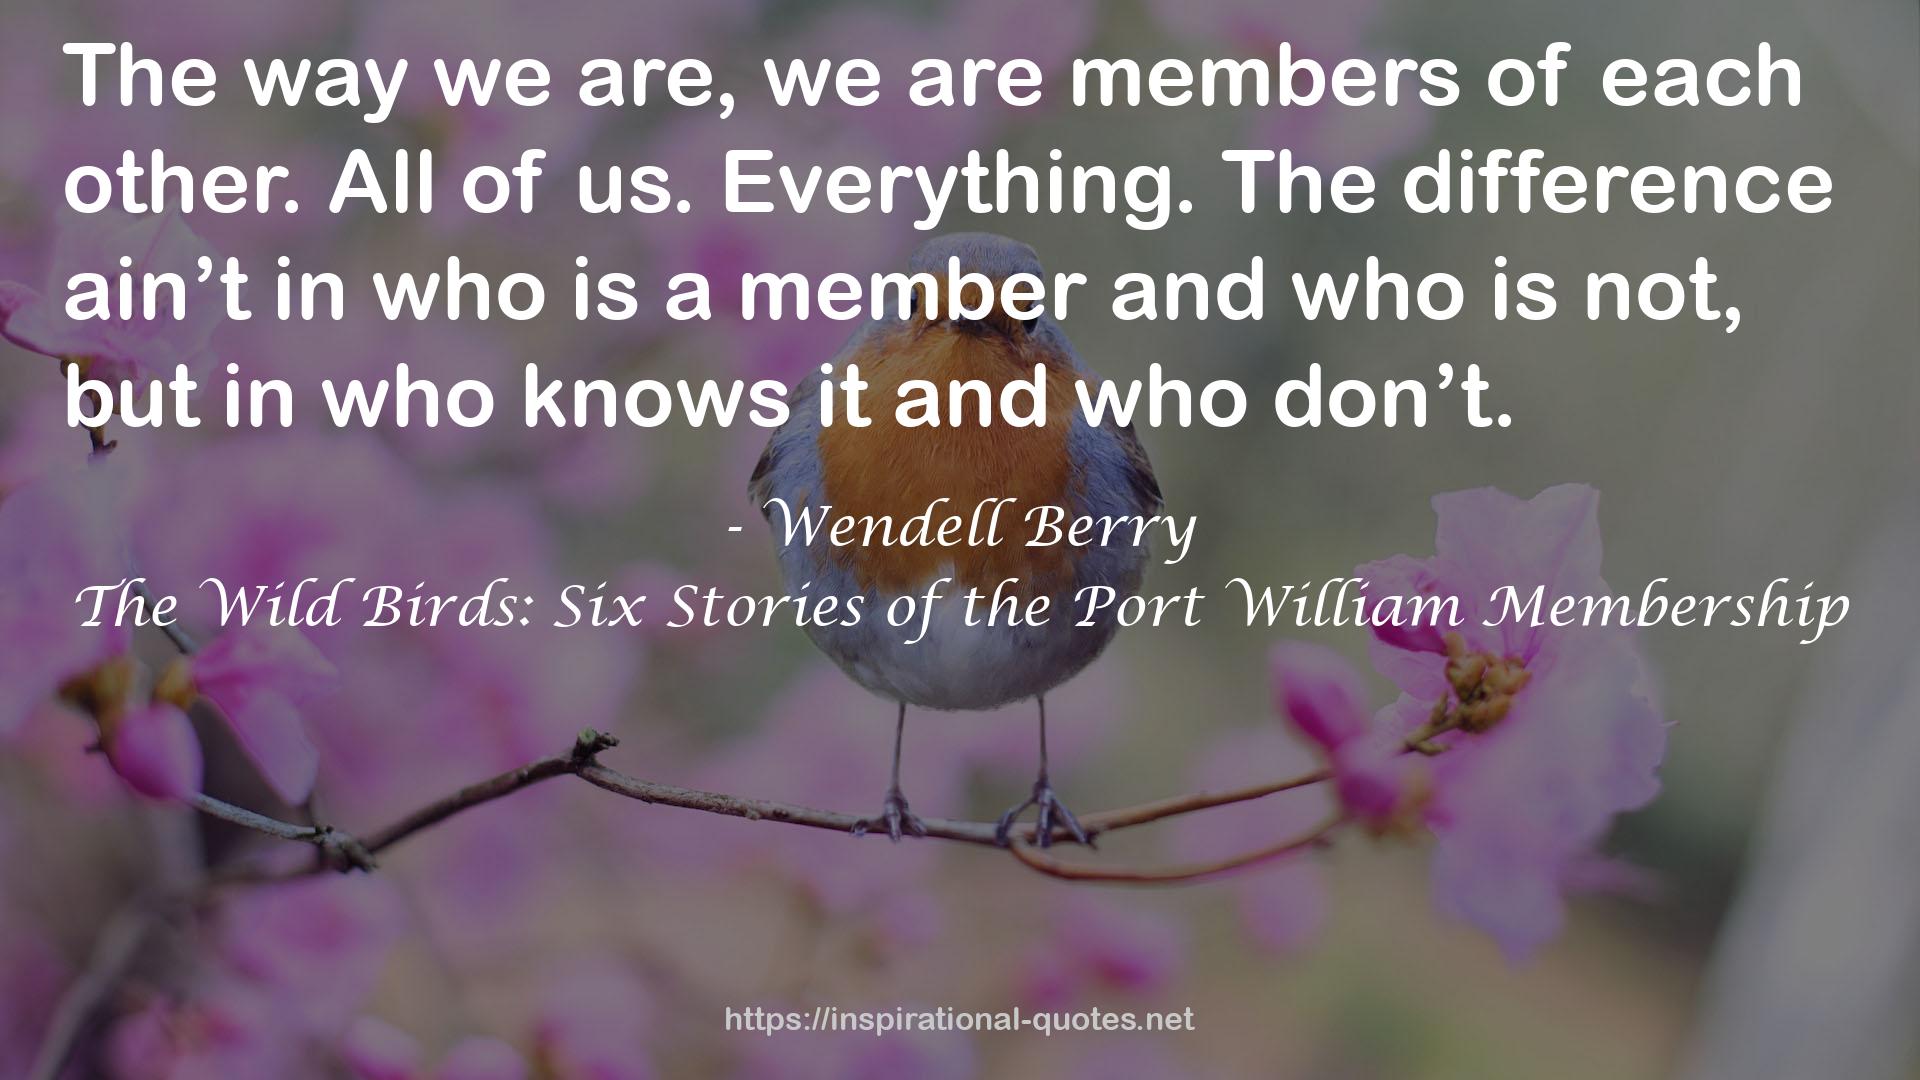 The Wild Birds: Six Stories of the Port William Membership QUOTES